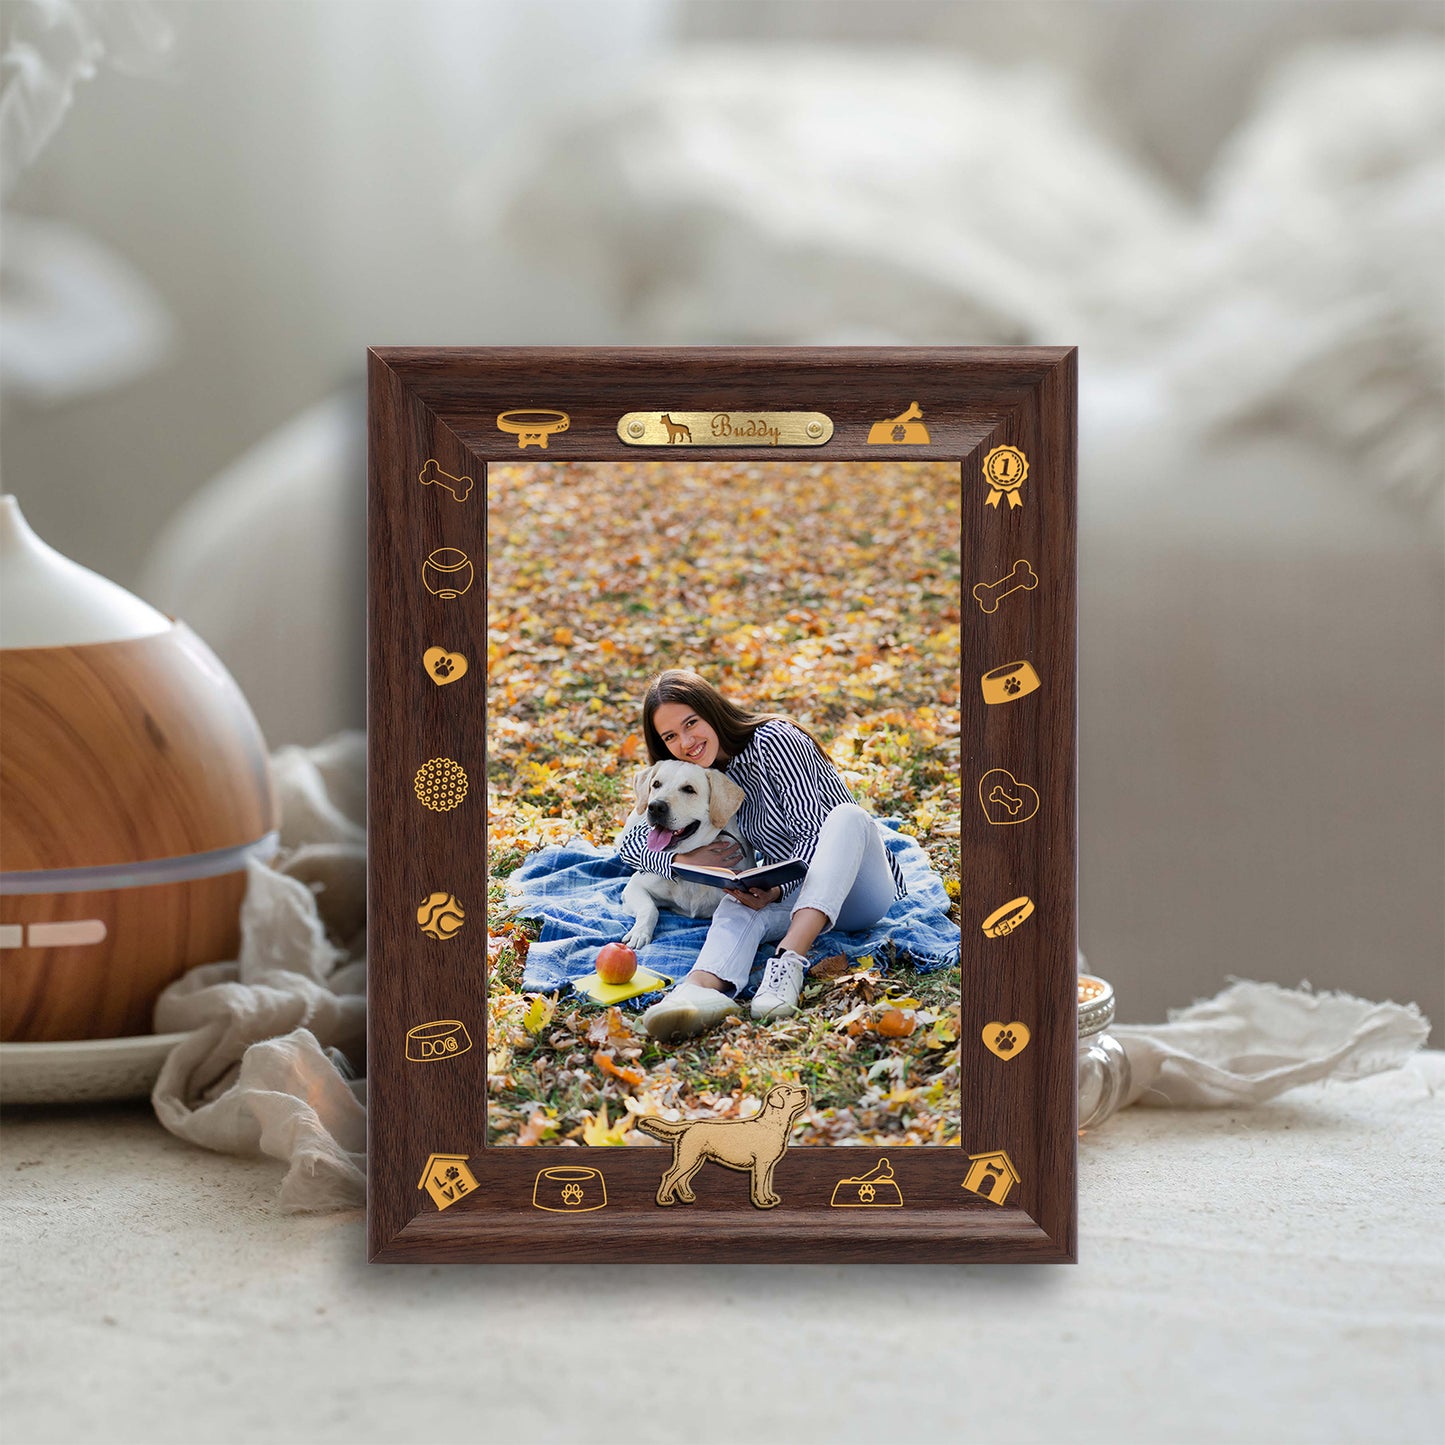 Decoration Photo Frame Dotride Custom Picture Frame, Wood Photo Frame with Custom Wooden Carving, Can be engraved with any text you want, suitable for Suitable for Various Themes, Golden Retriever